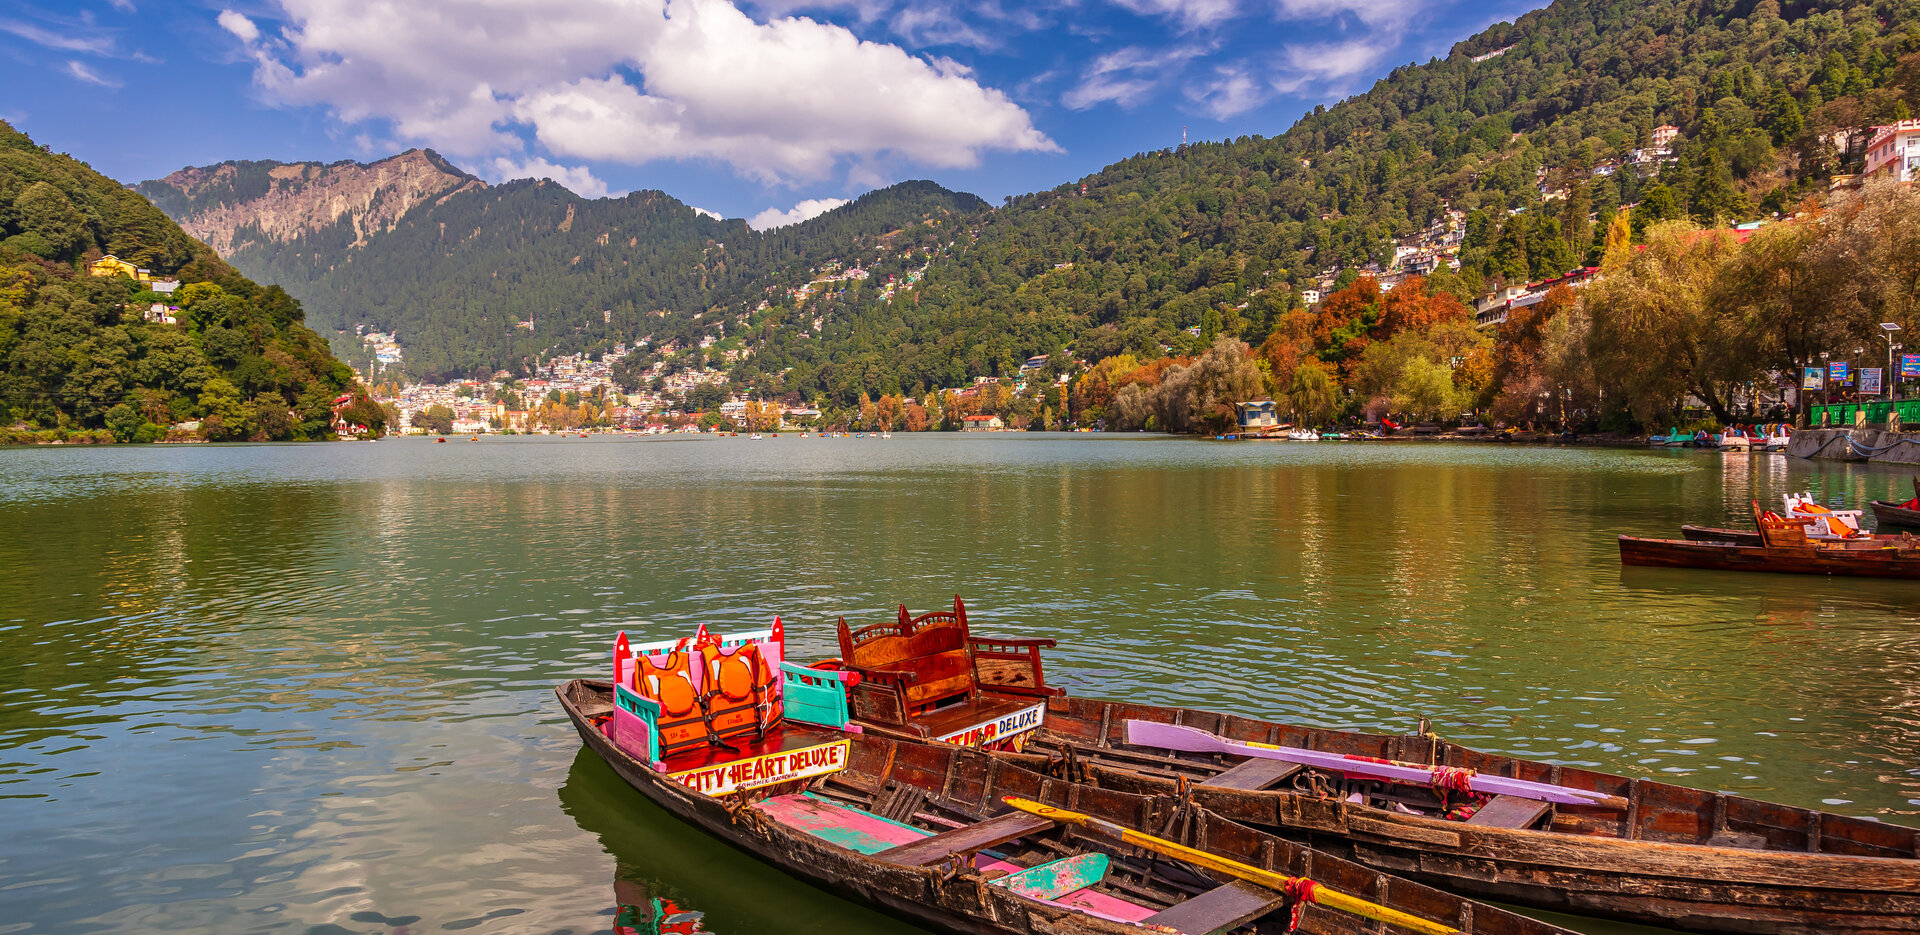 nainital trip for 3 days cost